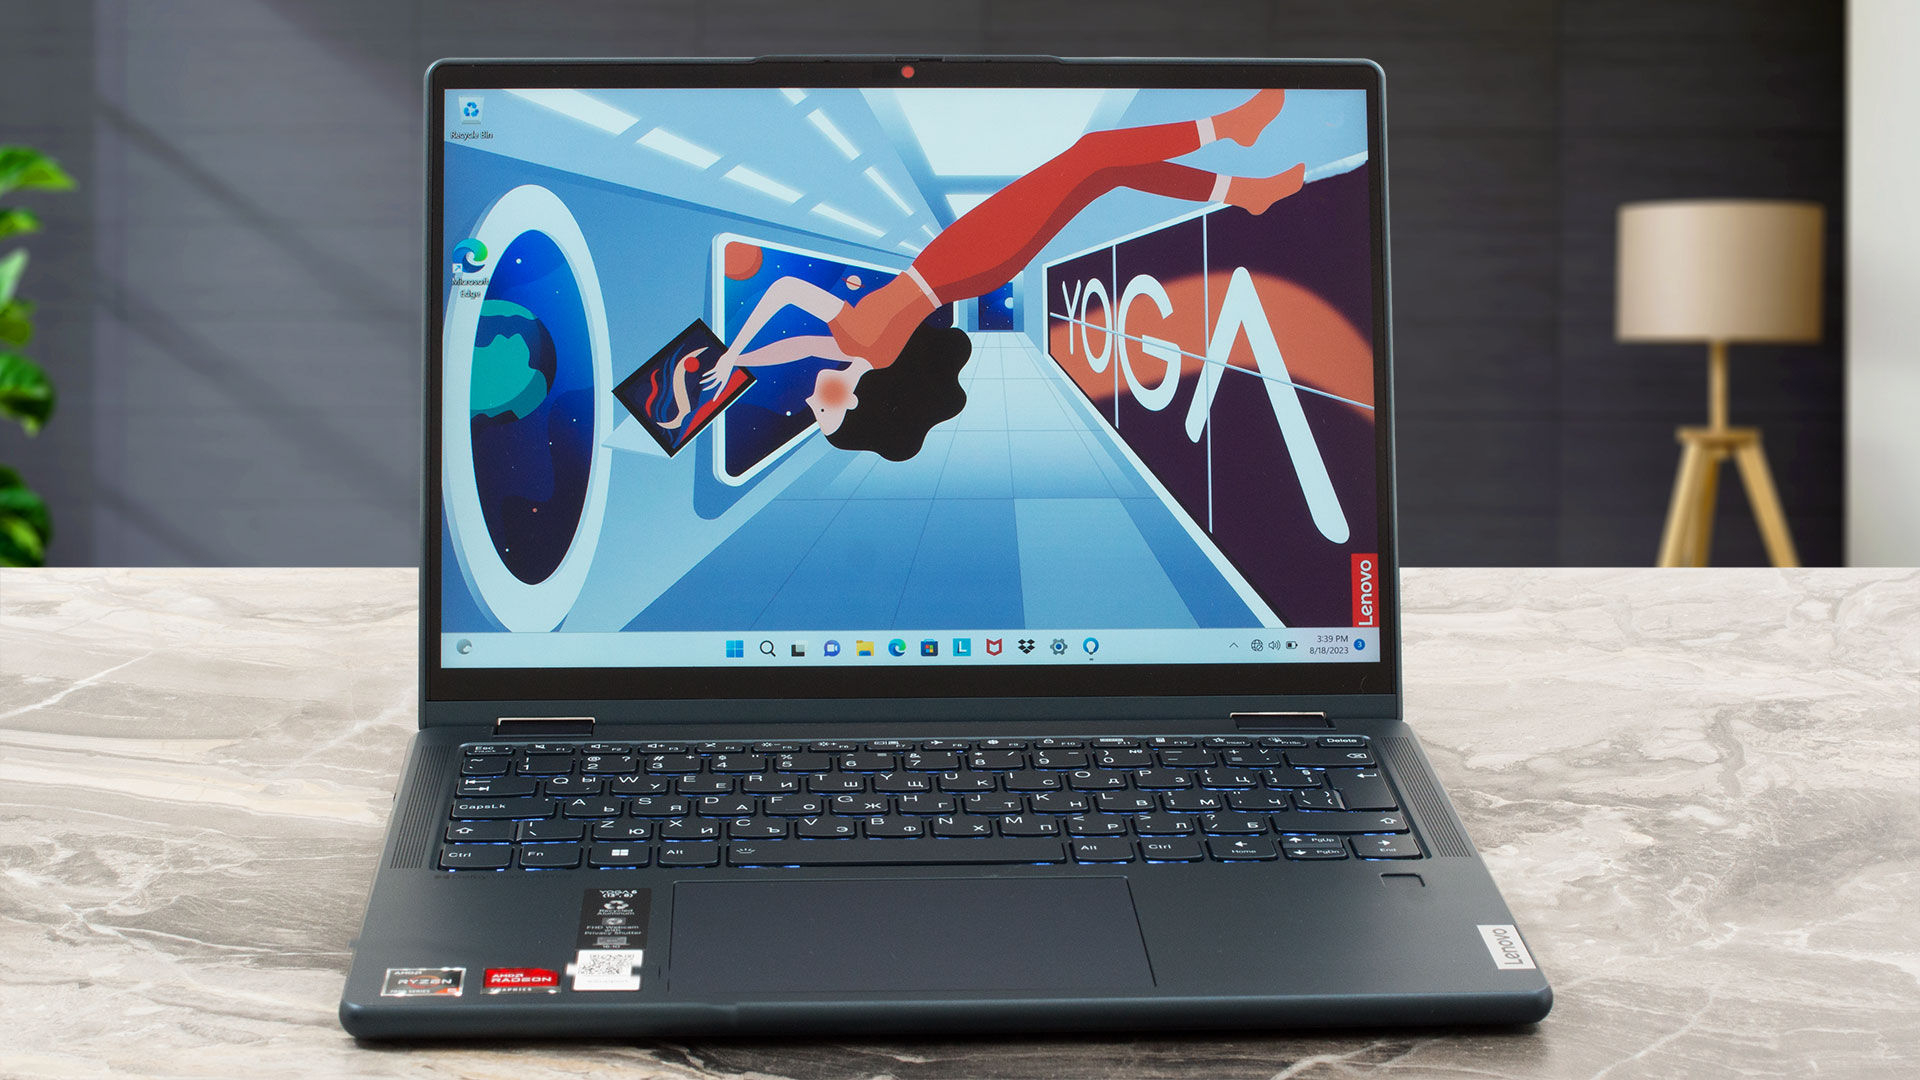 Yoga 6 13” 2 in 1 Laptops with AMD